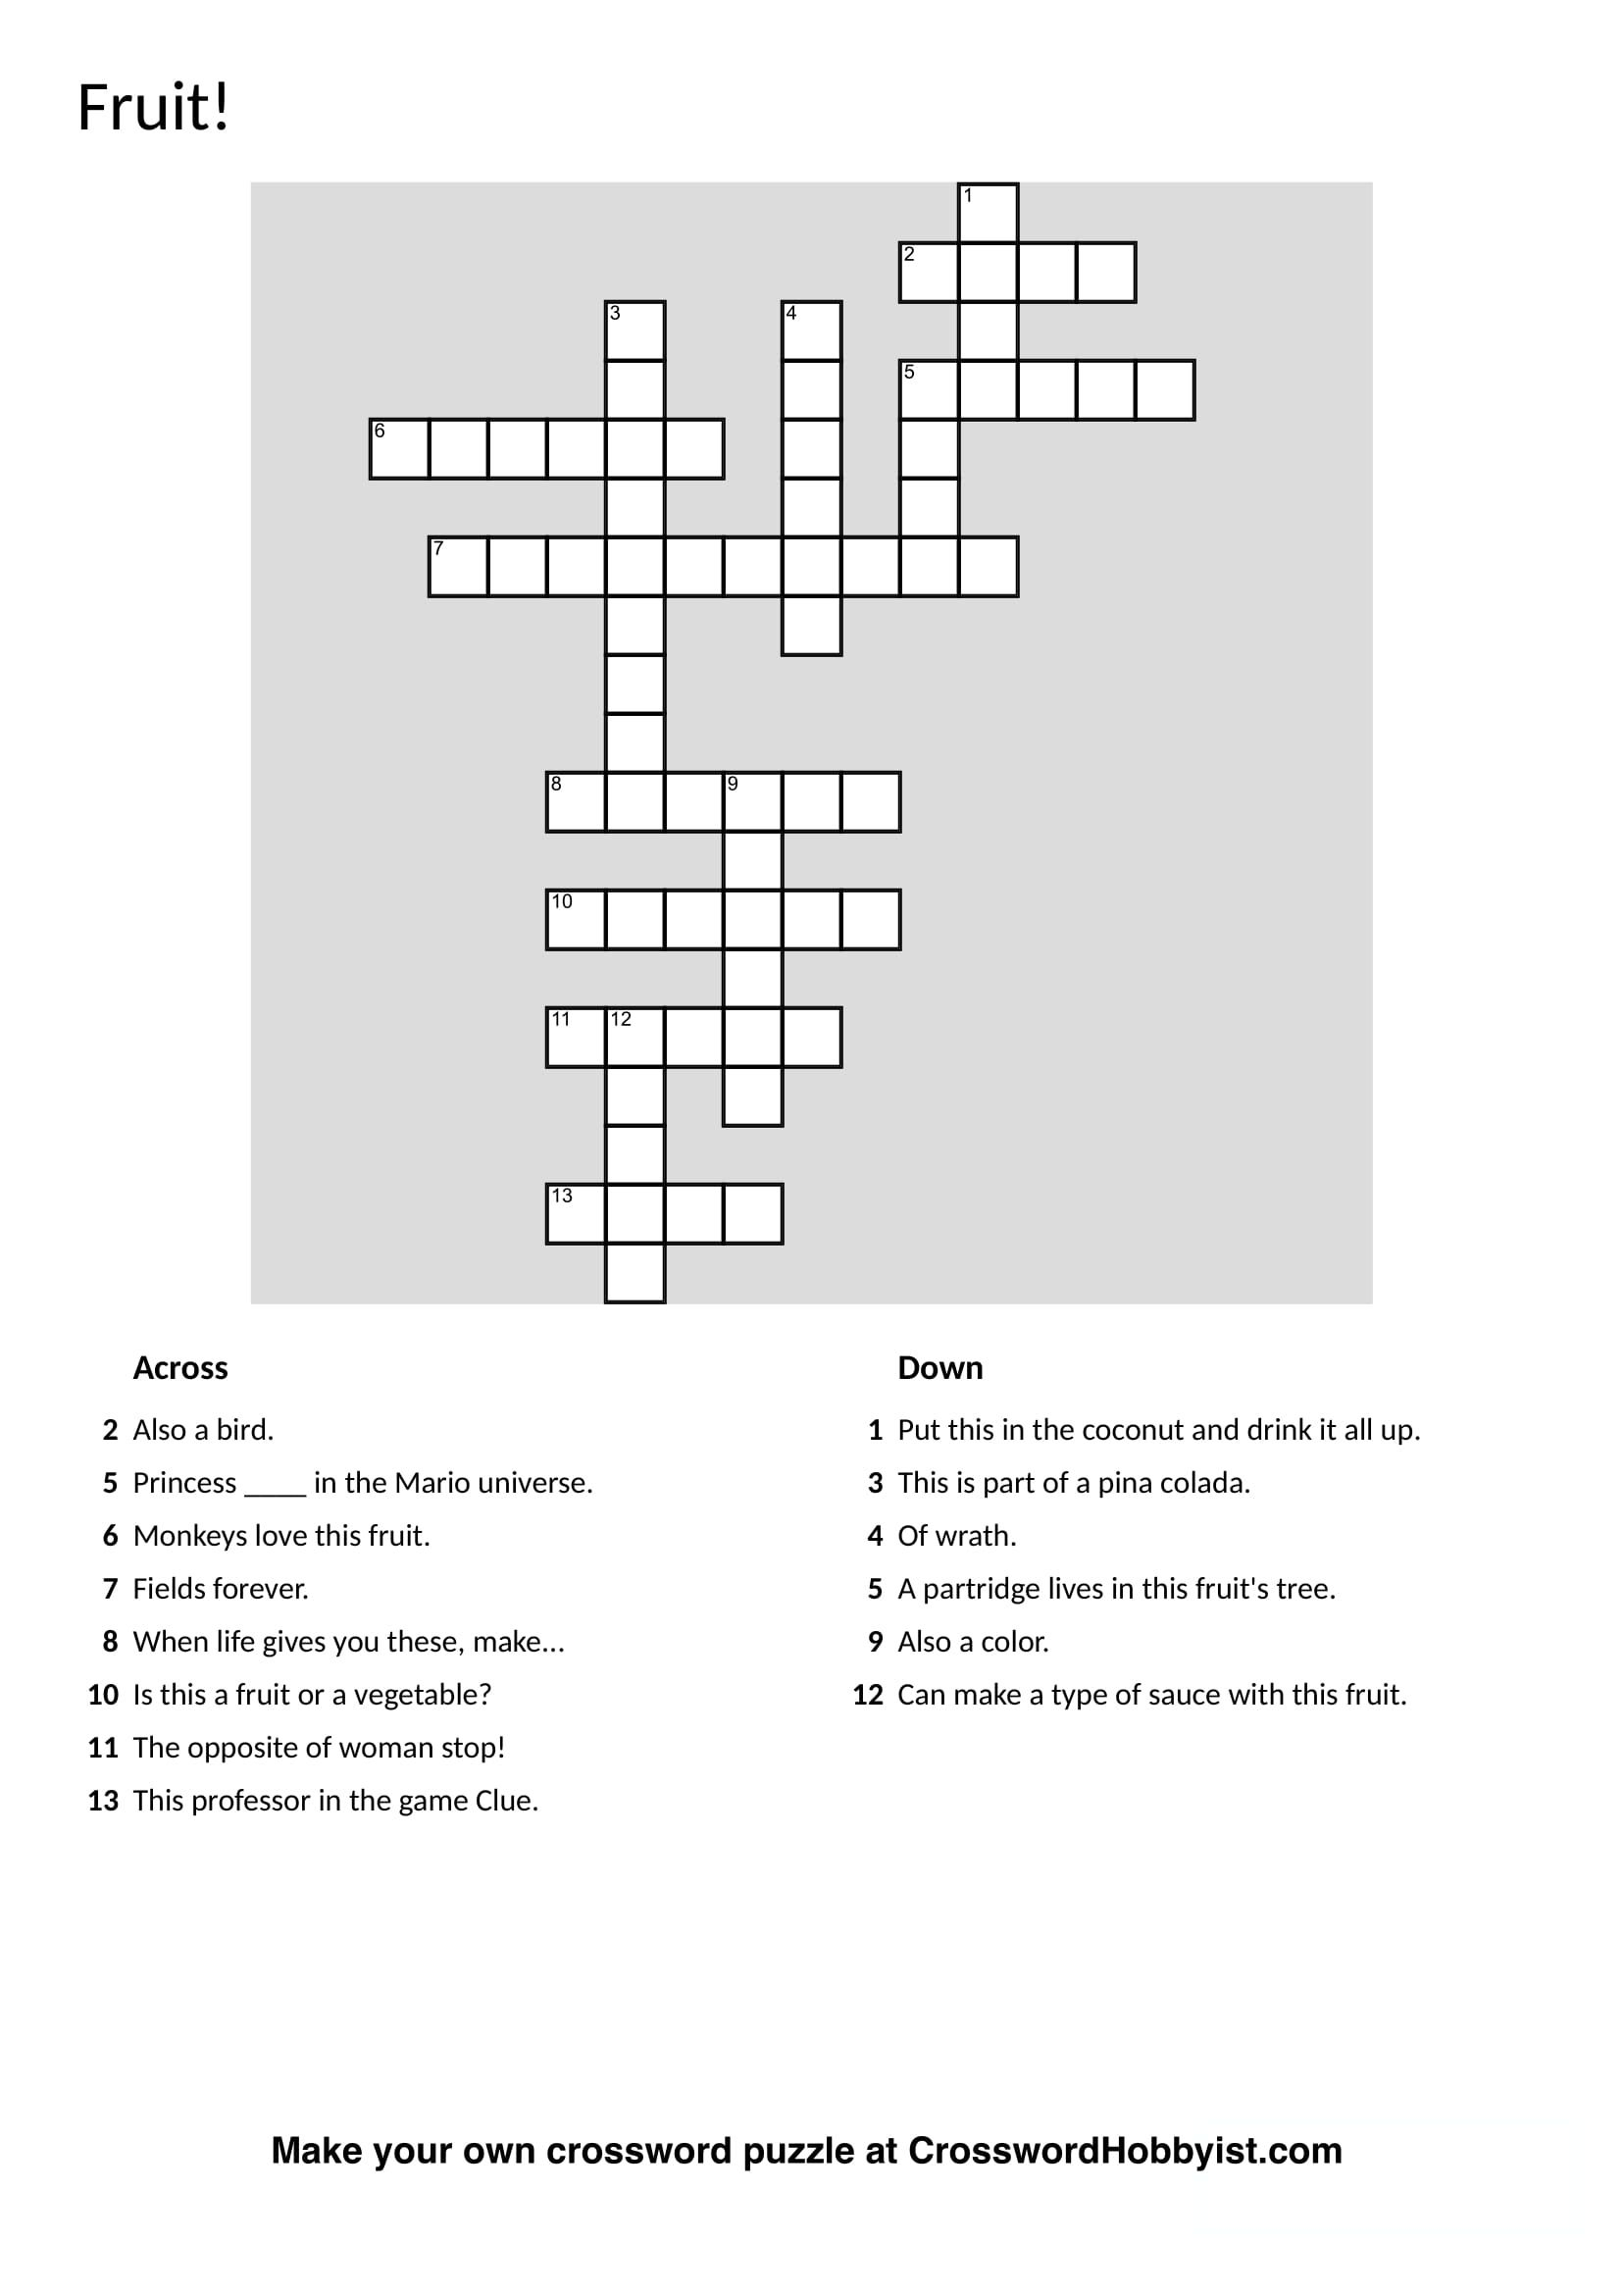 Make Your Own Fun Crossword Puzzles With Crosswordhobbyist - Make Your Own Crossword Puzzle Free Printable